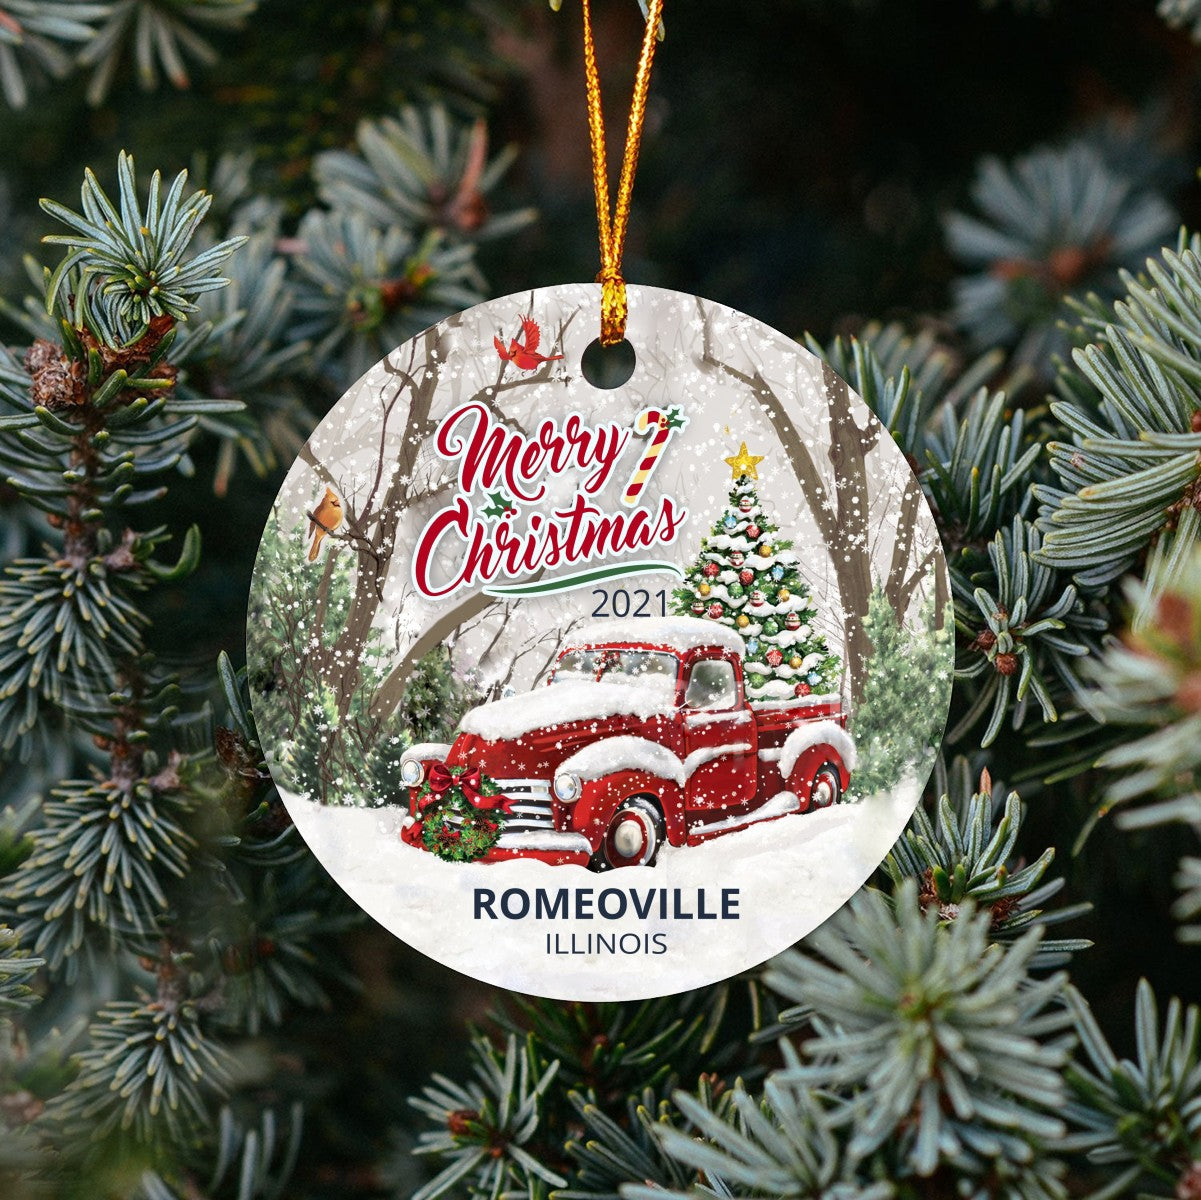 Christmas Tree Ornaments Romeoville - Ornament Customize With Name City And State Romeoville Illinois IL - Red Truck Xmas Ornaments 3'' Plastic Gift For Family, Friend And Housewarming